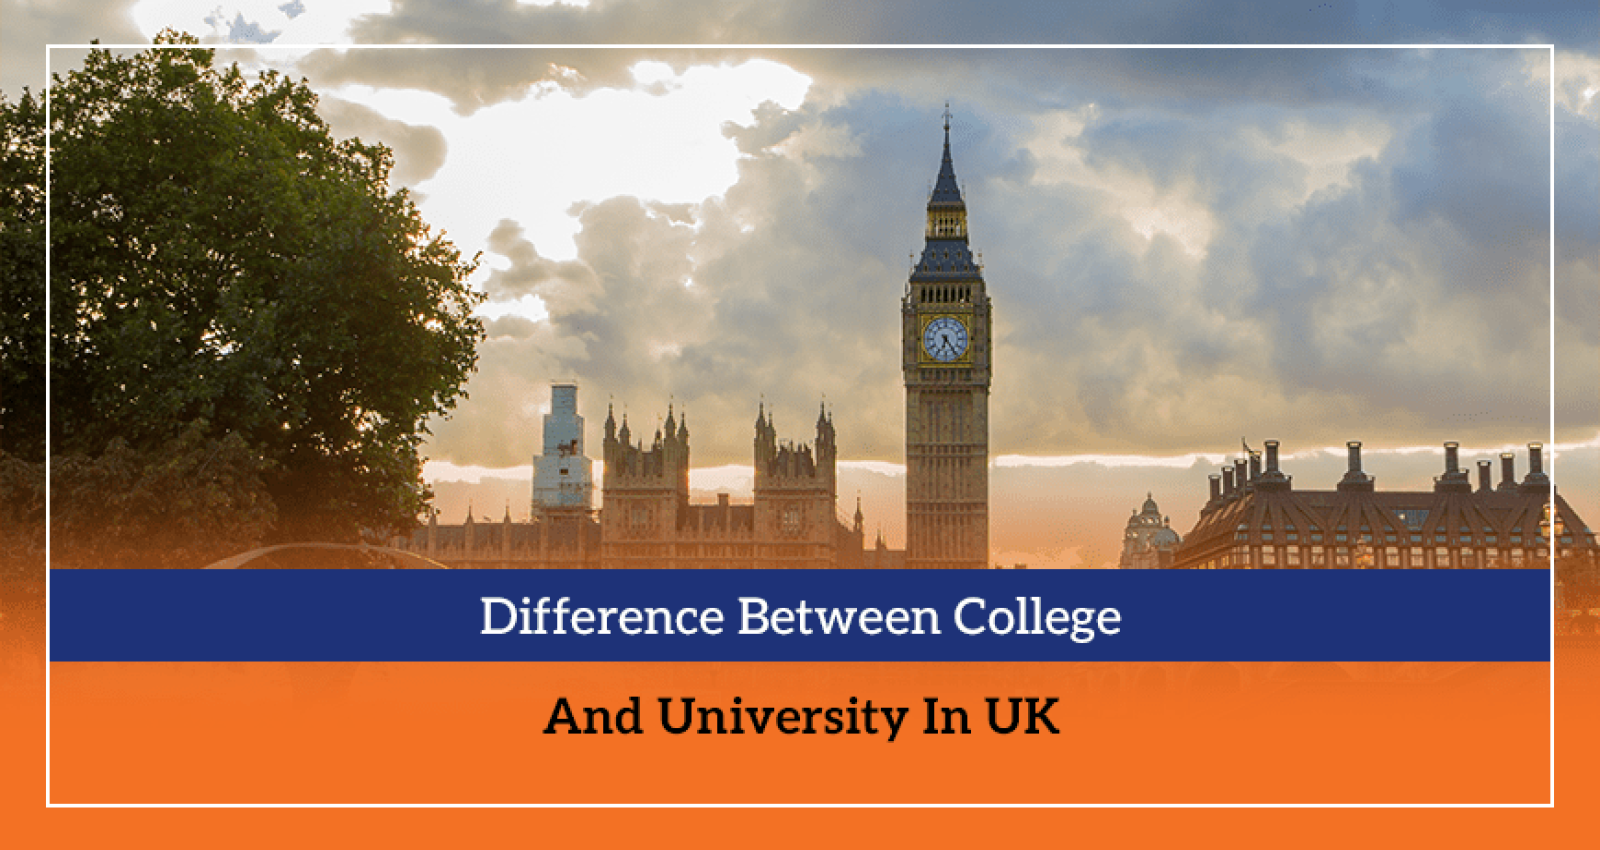 Difference Between College And University In UK